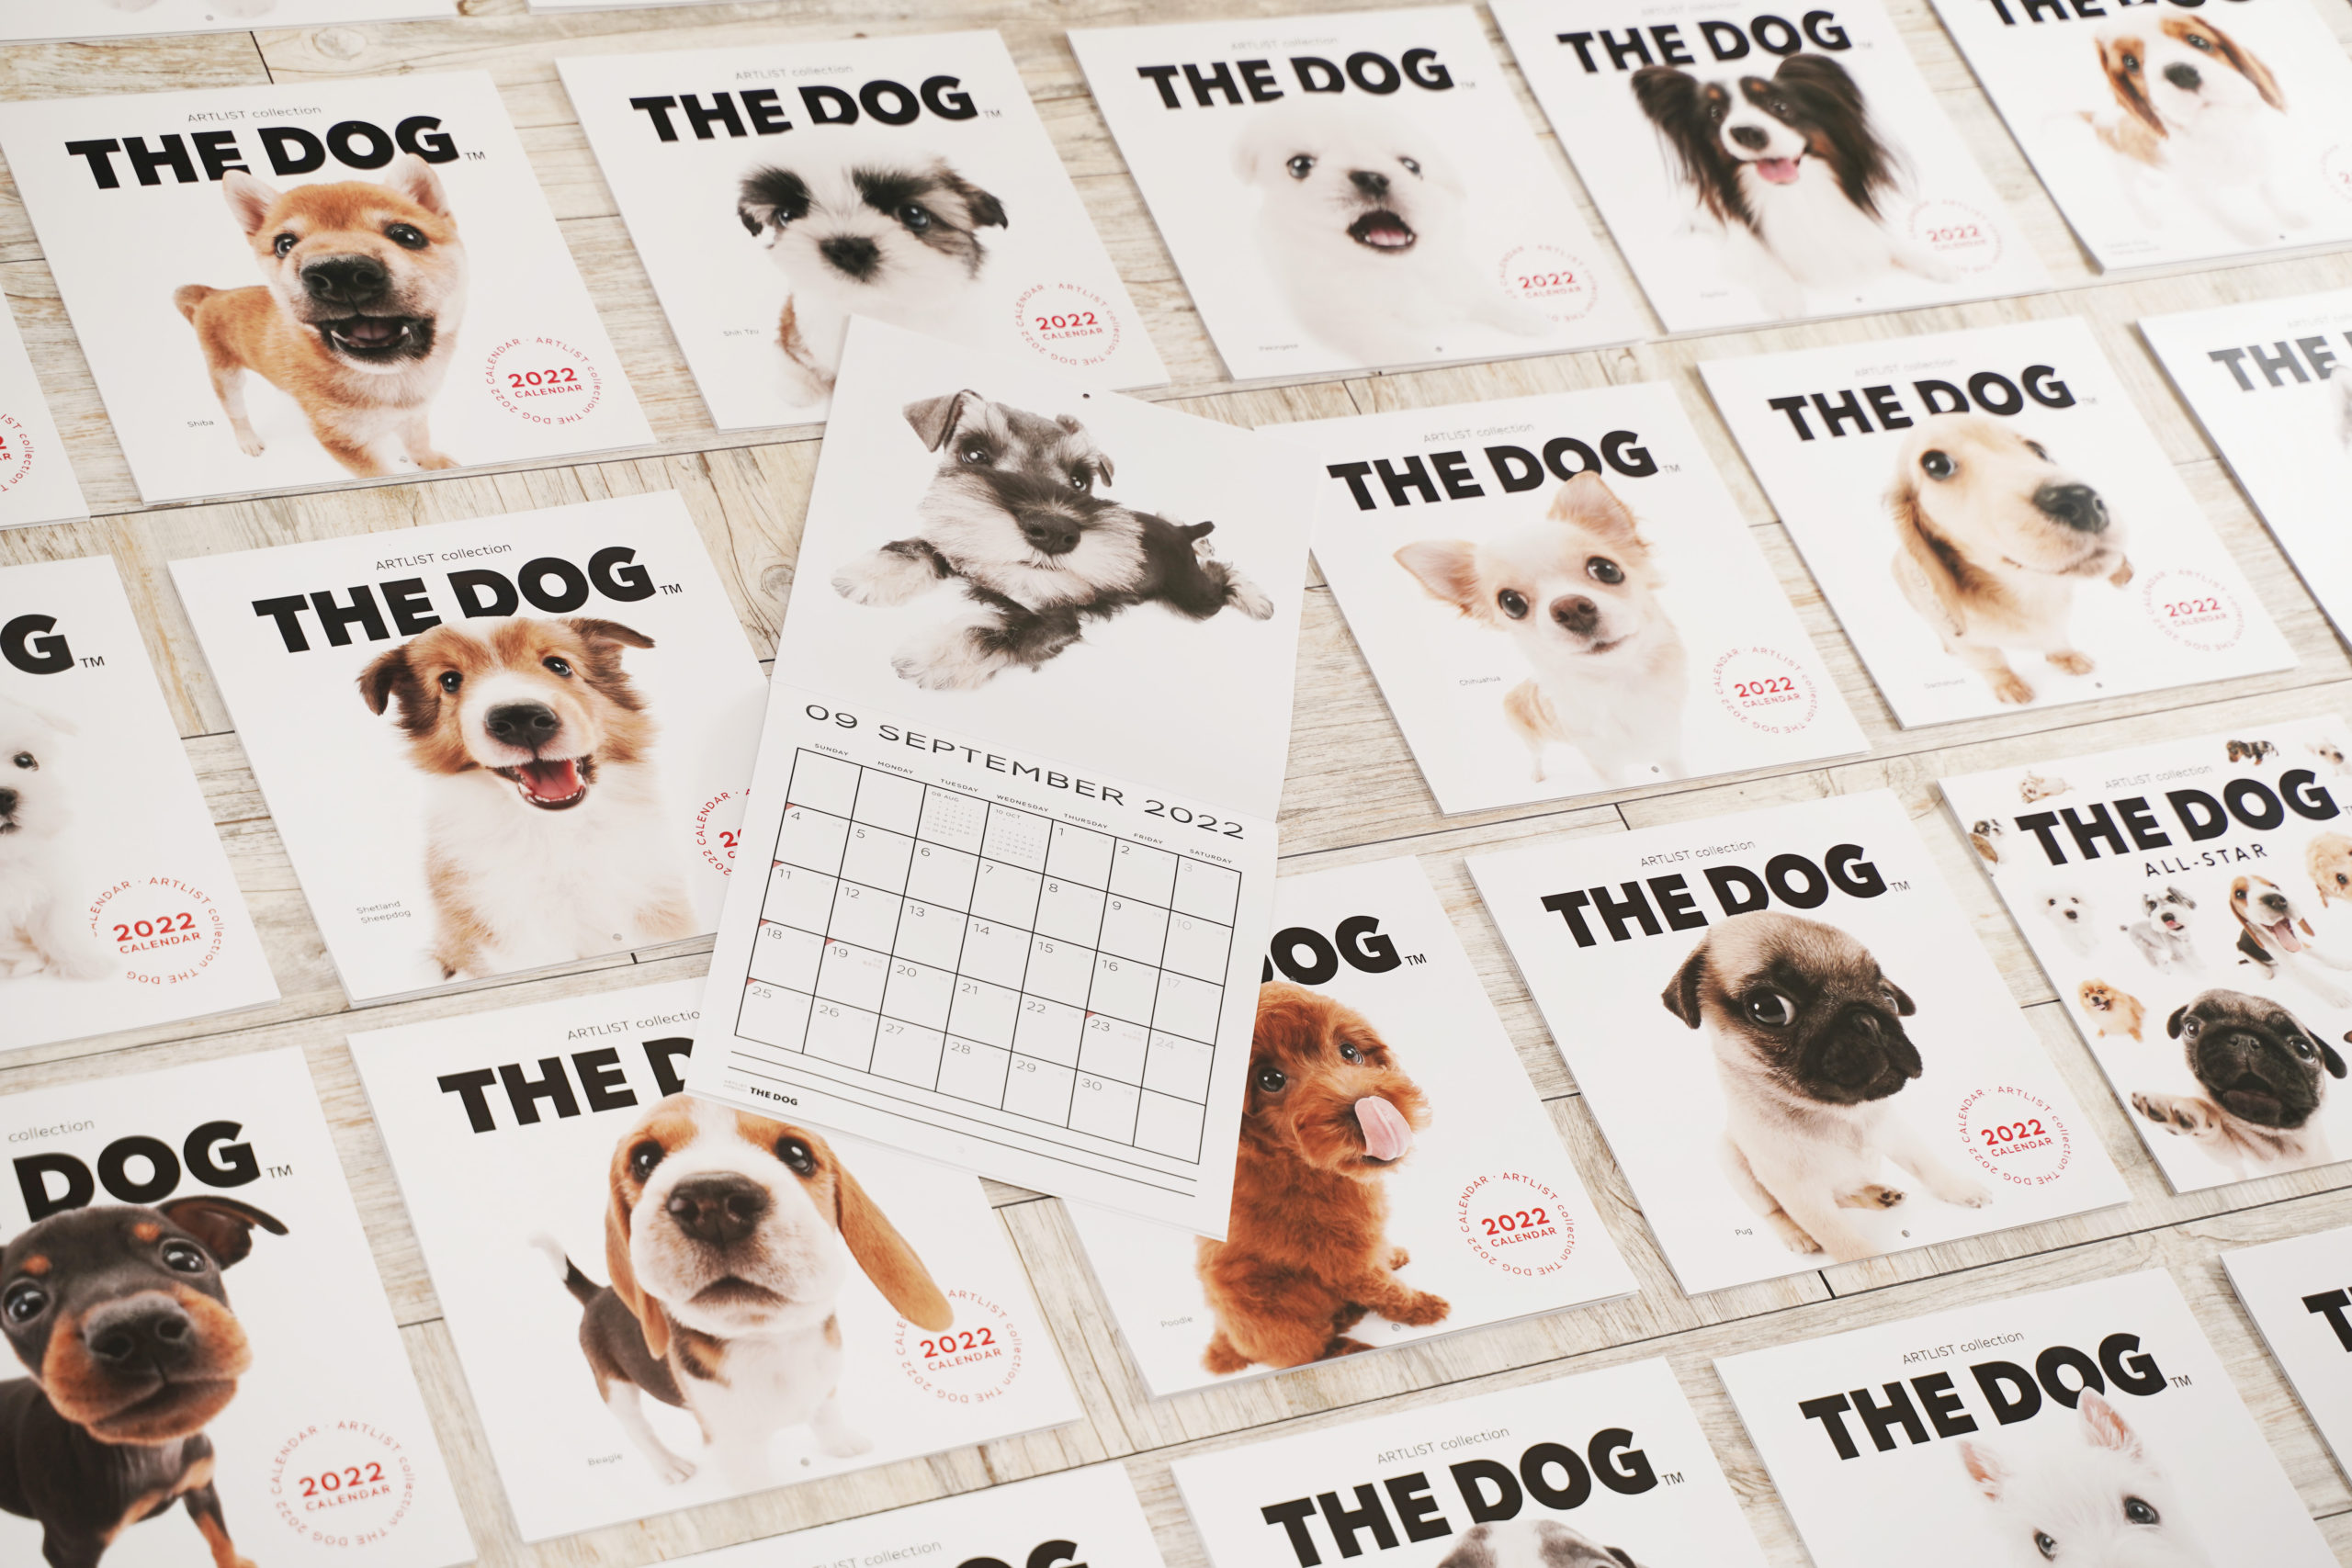 THE DOG 2022 Calendars are available for purchase even from outside